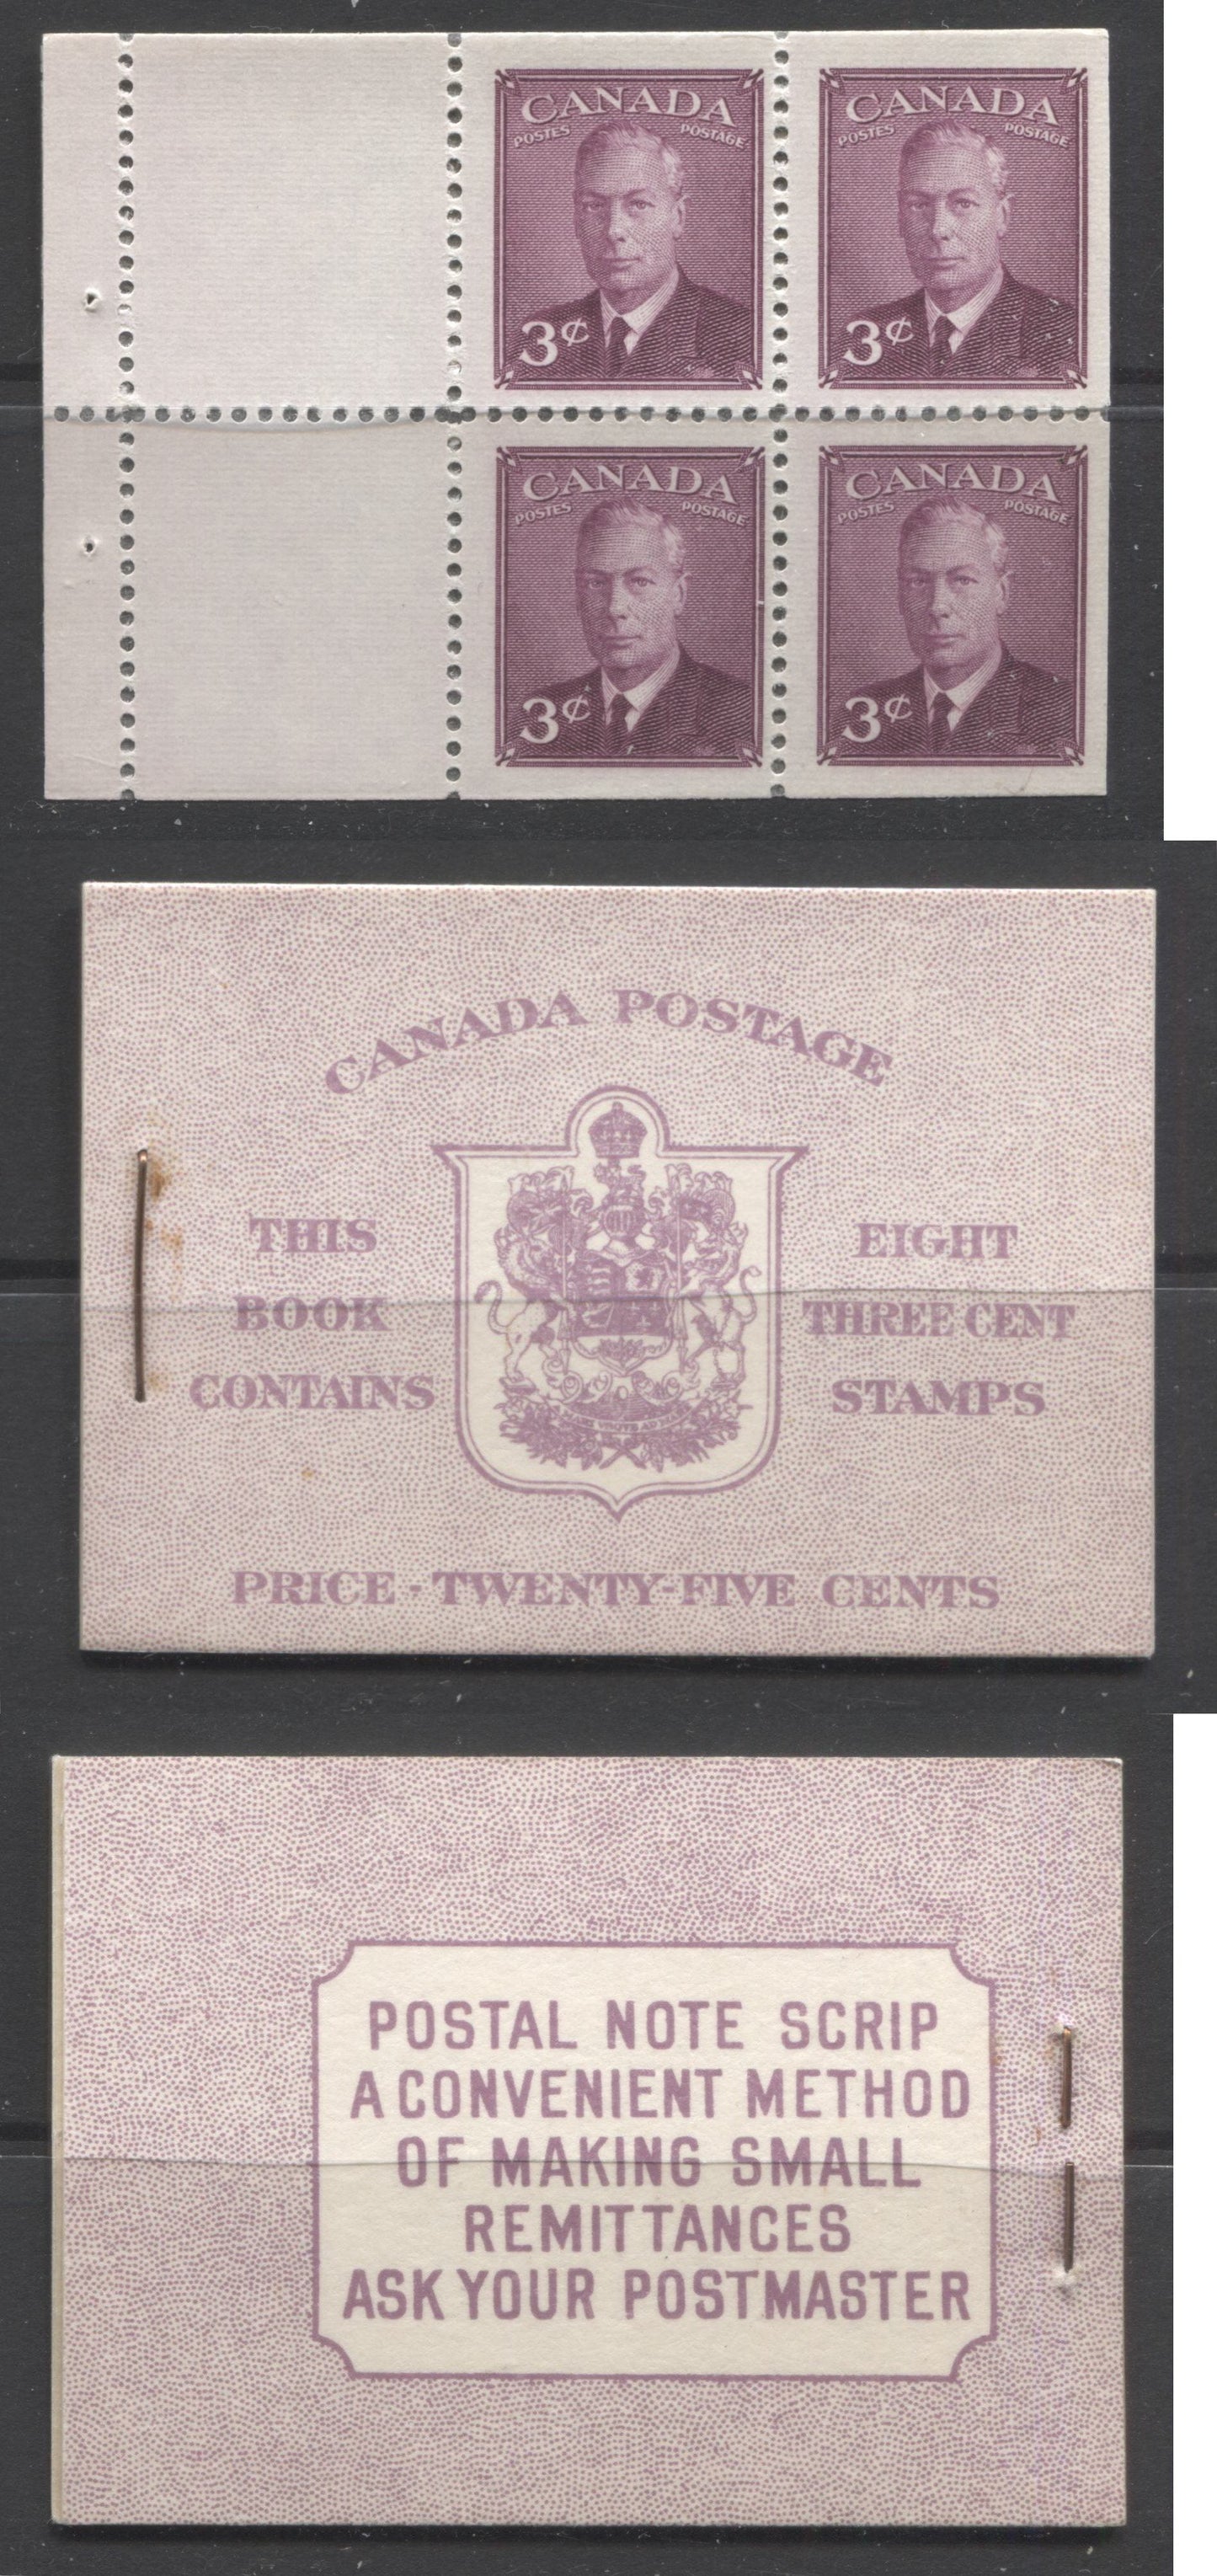 Canada #BK40a 1949-1953 Postes-Postage Issue Complete 25c English, Booklet Containing 2 Panes of the 3c Rose-Purple King George VI, Harris Front Cover Type IIf, Back Cover Caii, 7c & 5c Rate Page Brixton Chrome 